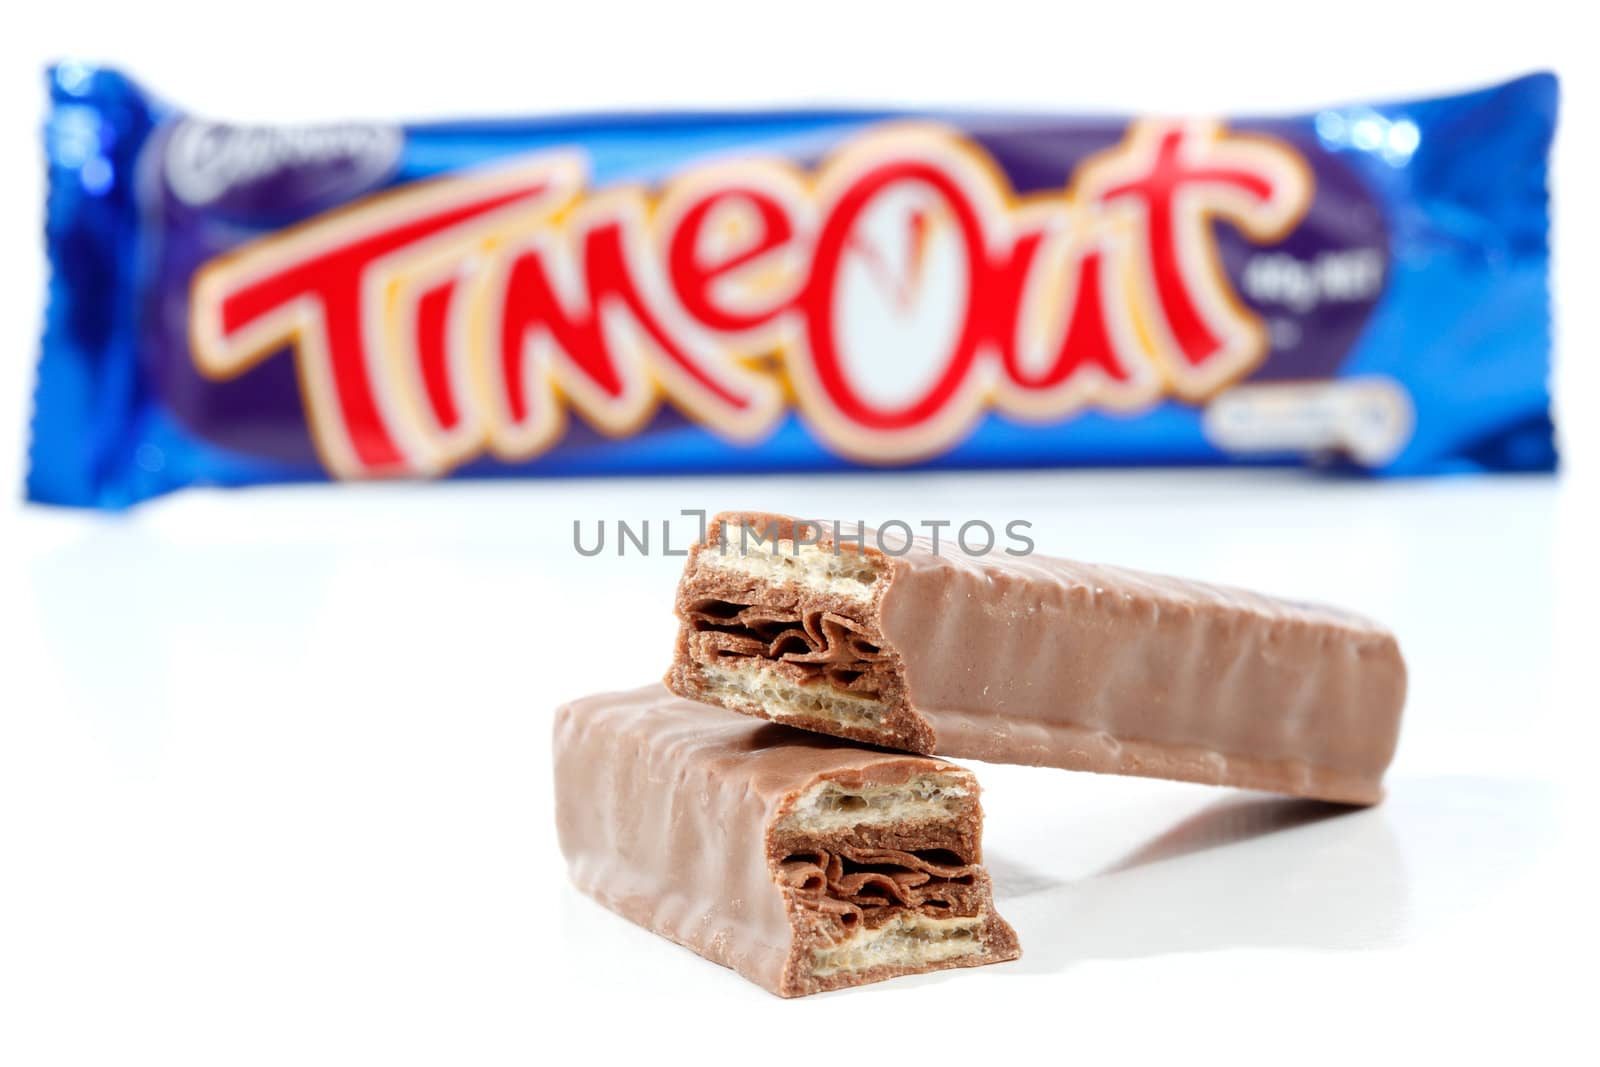 Cadbury Timout chocolate bar 40g (892kj)  Showing wrapper in background and chocolate contents in focus in the foreground.   Timeout consists of wafer biscuits with a flake chocolate centre and coated in milk chocolate.  Photographed in studio on a white background.